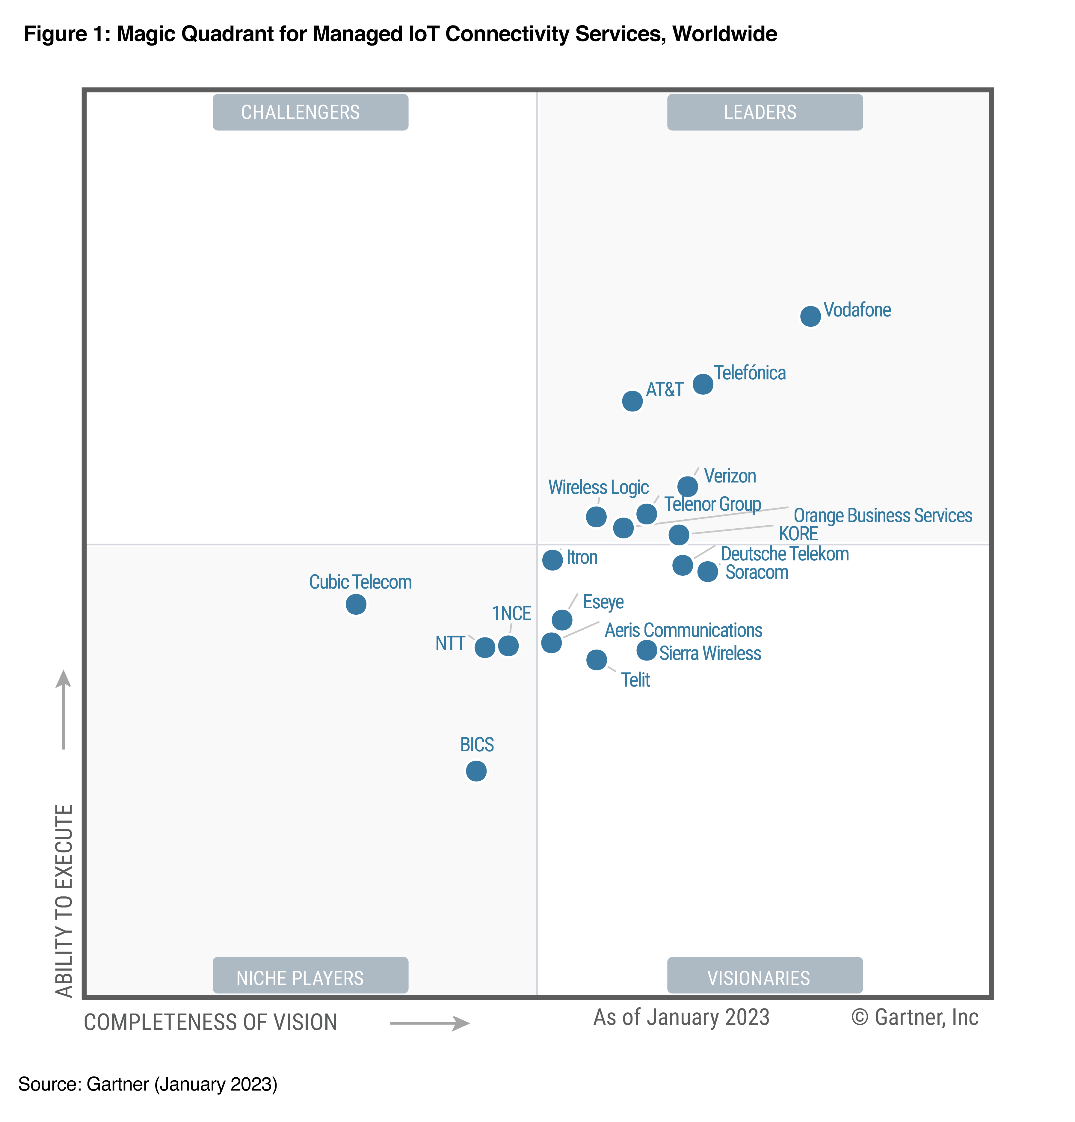 2022 Magic Quadrant for Data Center Outsourcing and Hybrid Infrastructure Managed Services, Worldwide